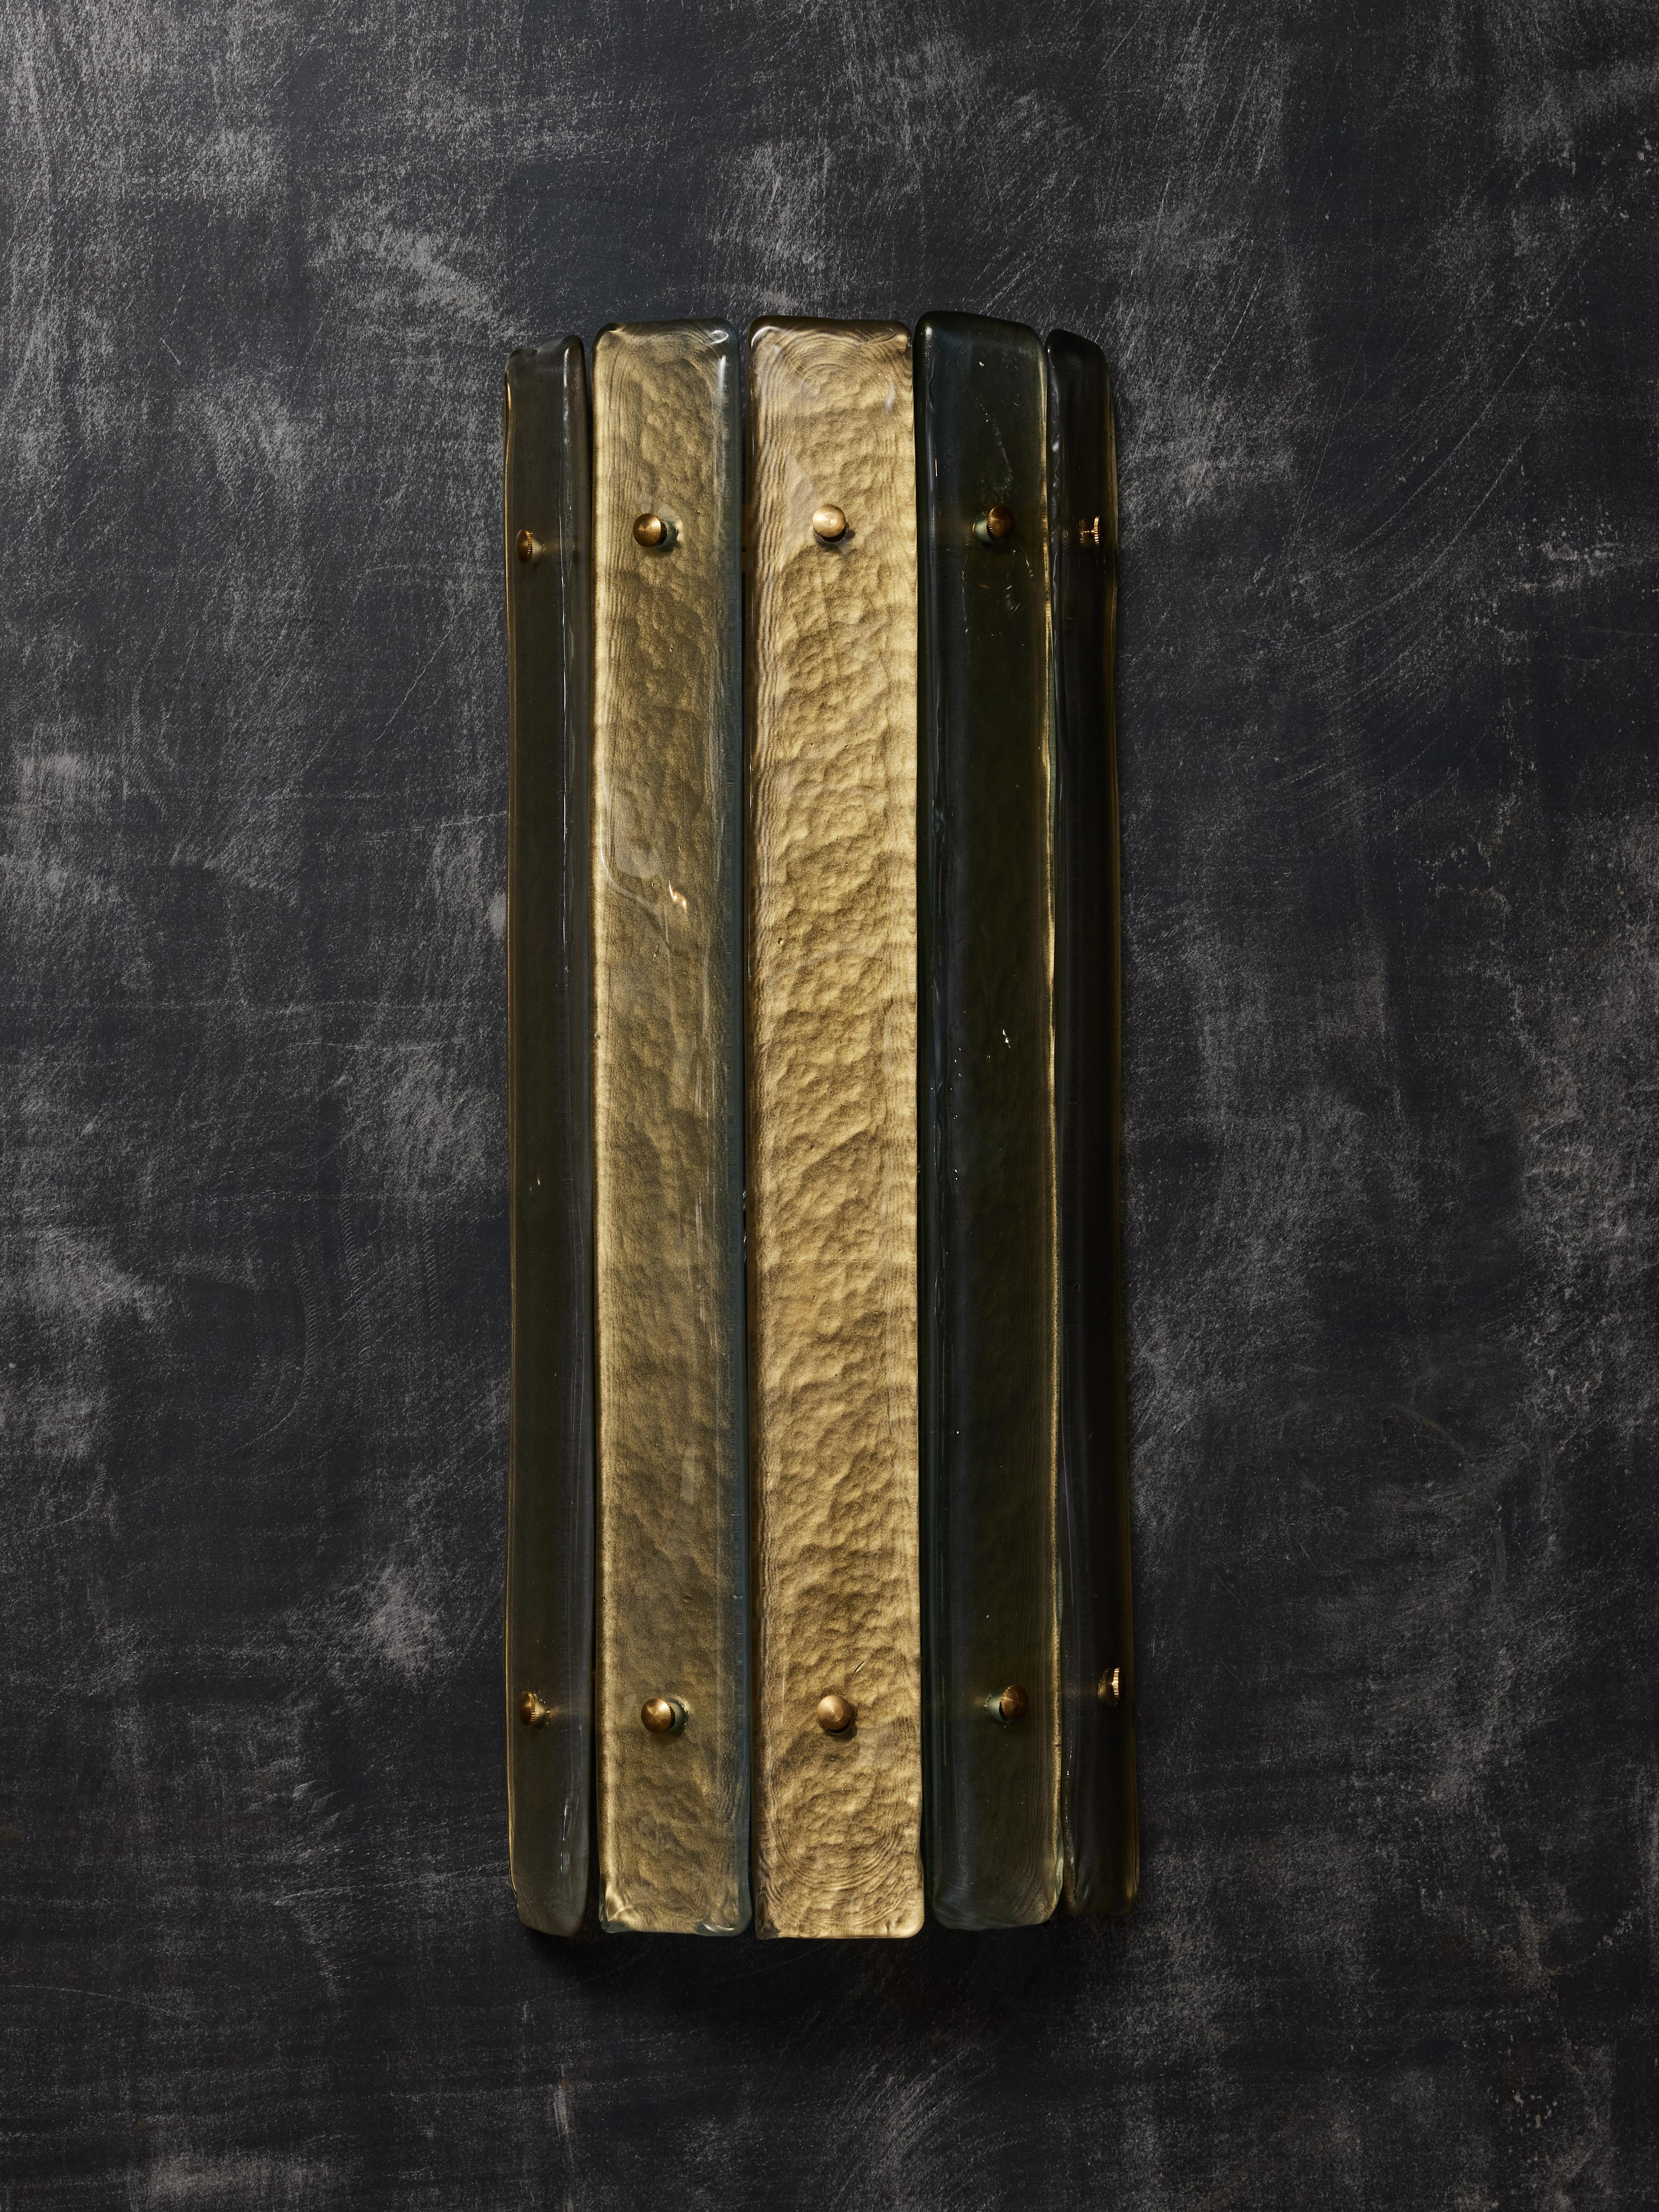 Curved brass wall sconces covered with narrow panels of gold tinted Murano glass. Two light sources per sconce